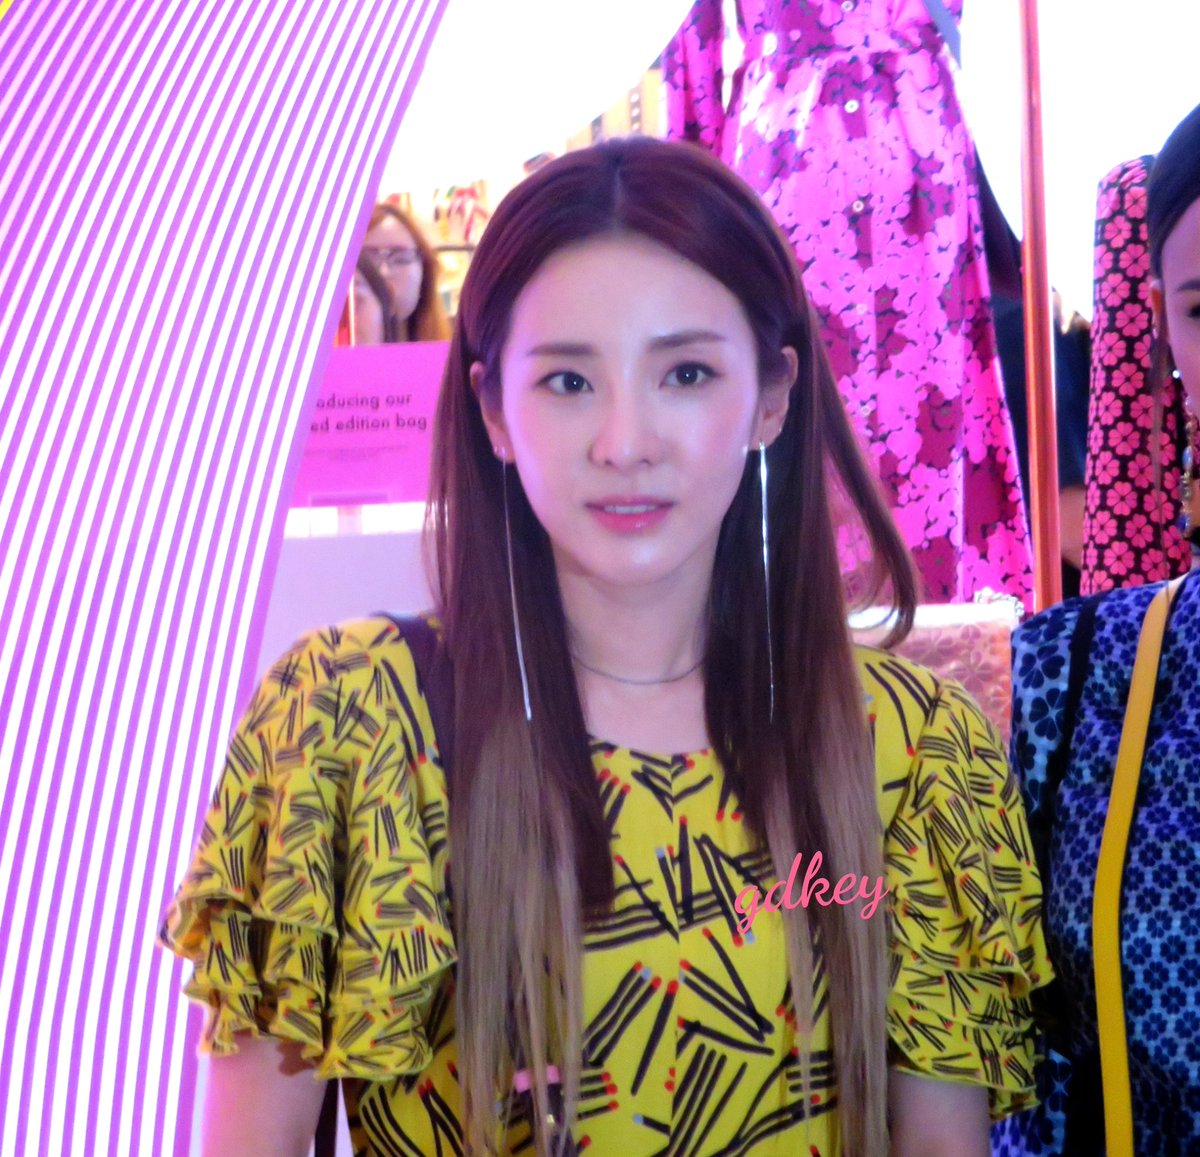 @krungy21 was your last trip was for KateSpade in 2019??!